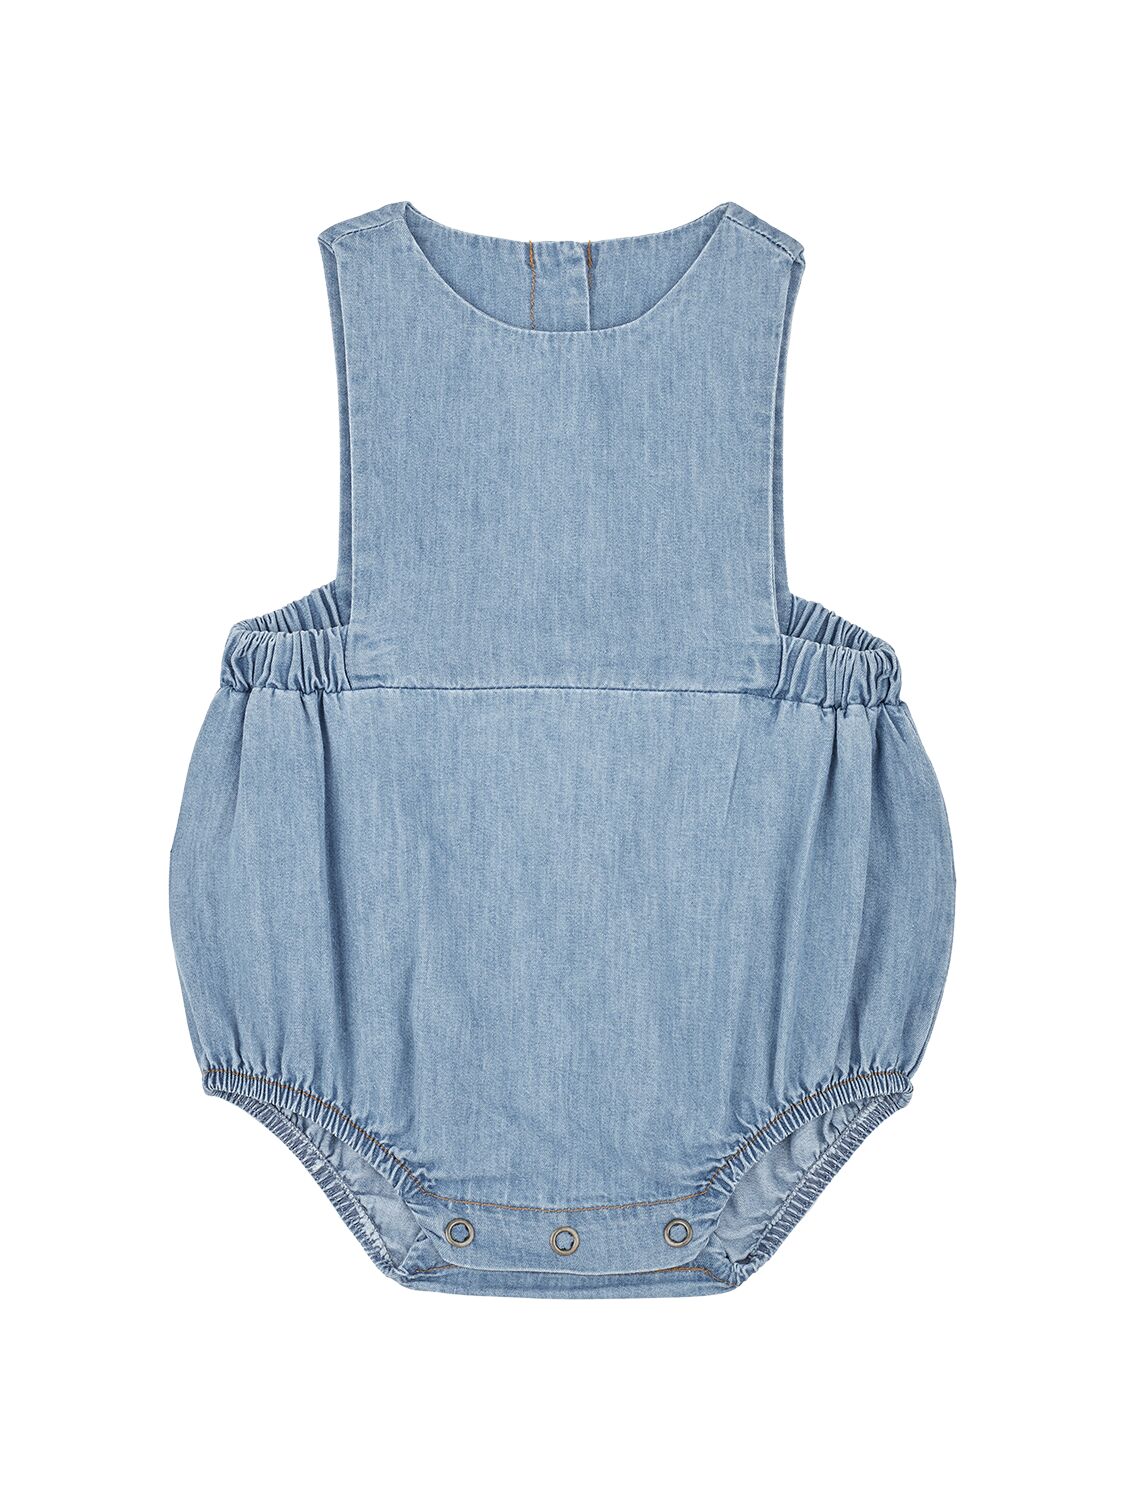 Image of Cotton Chambray Romper